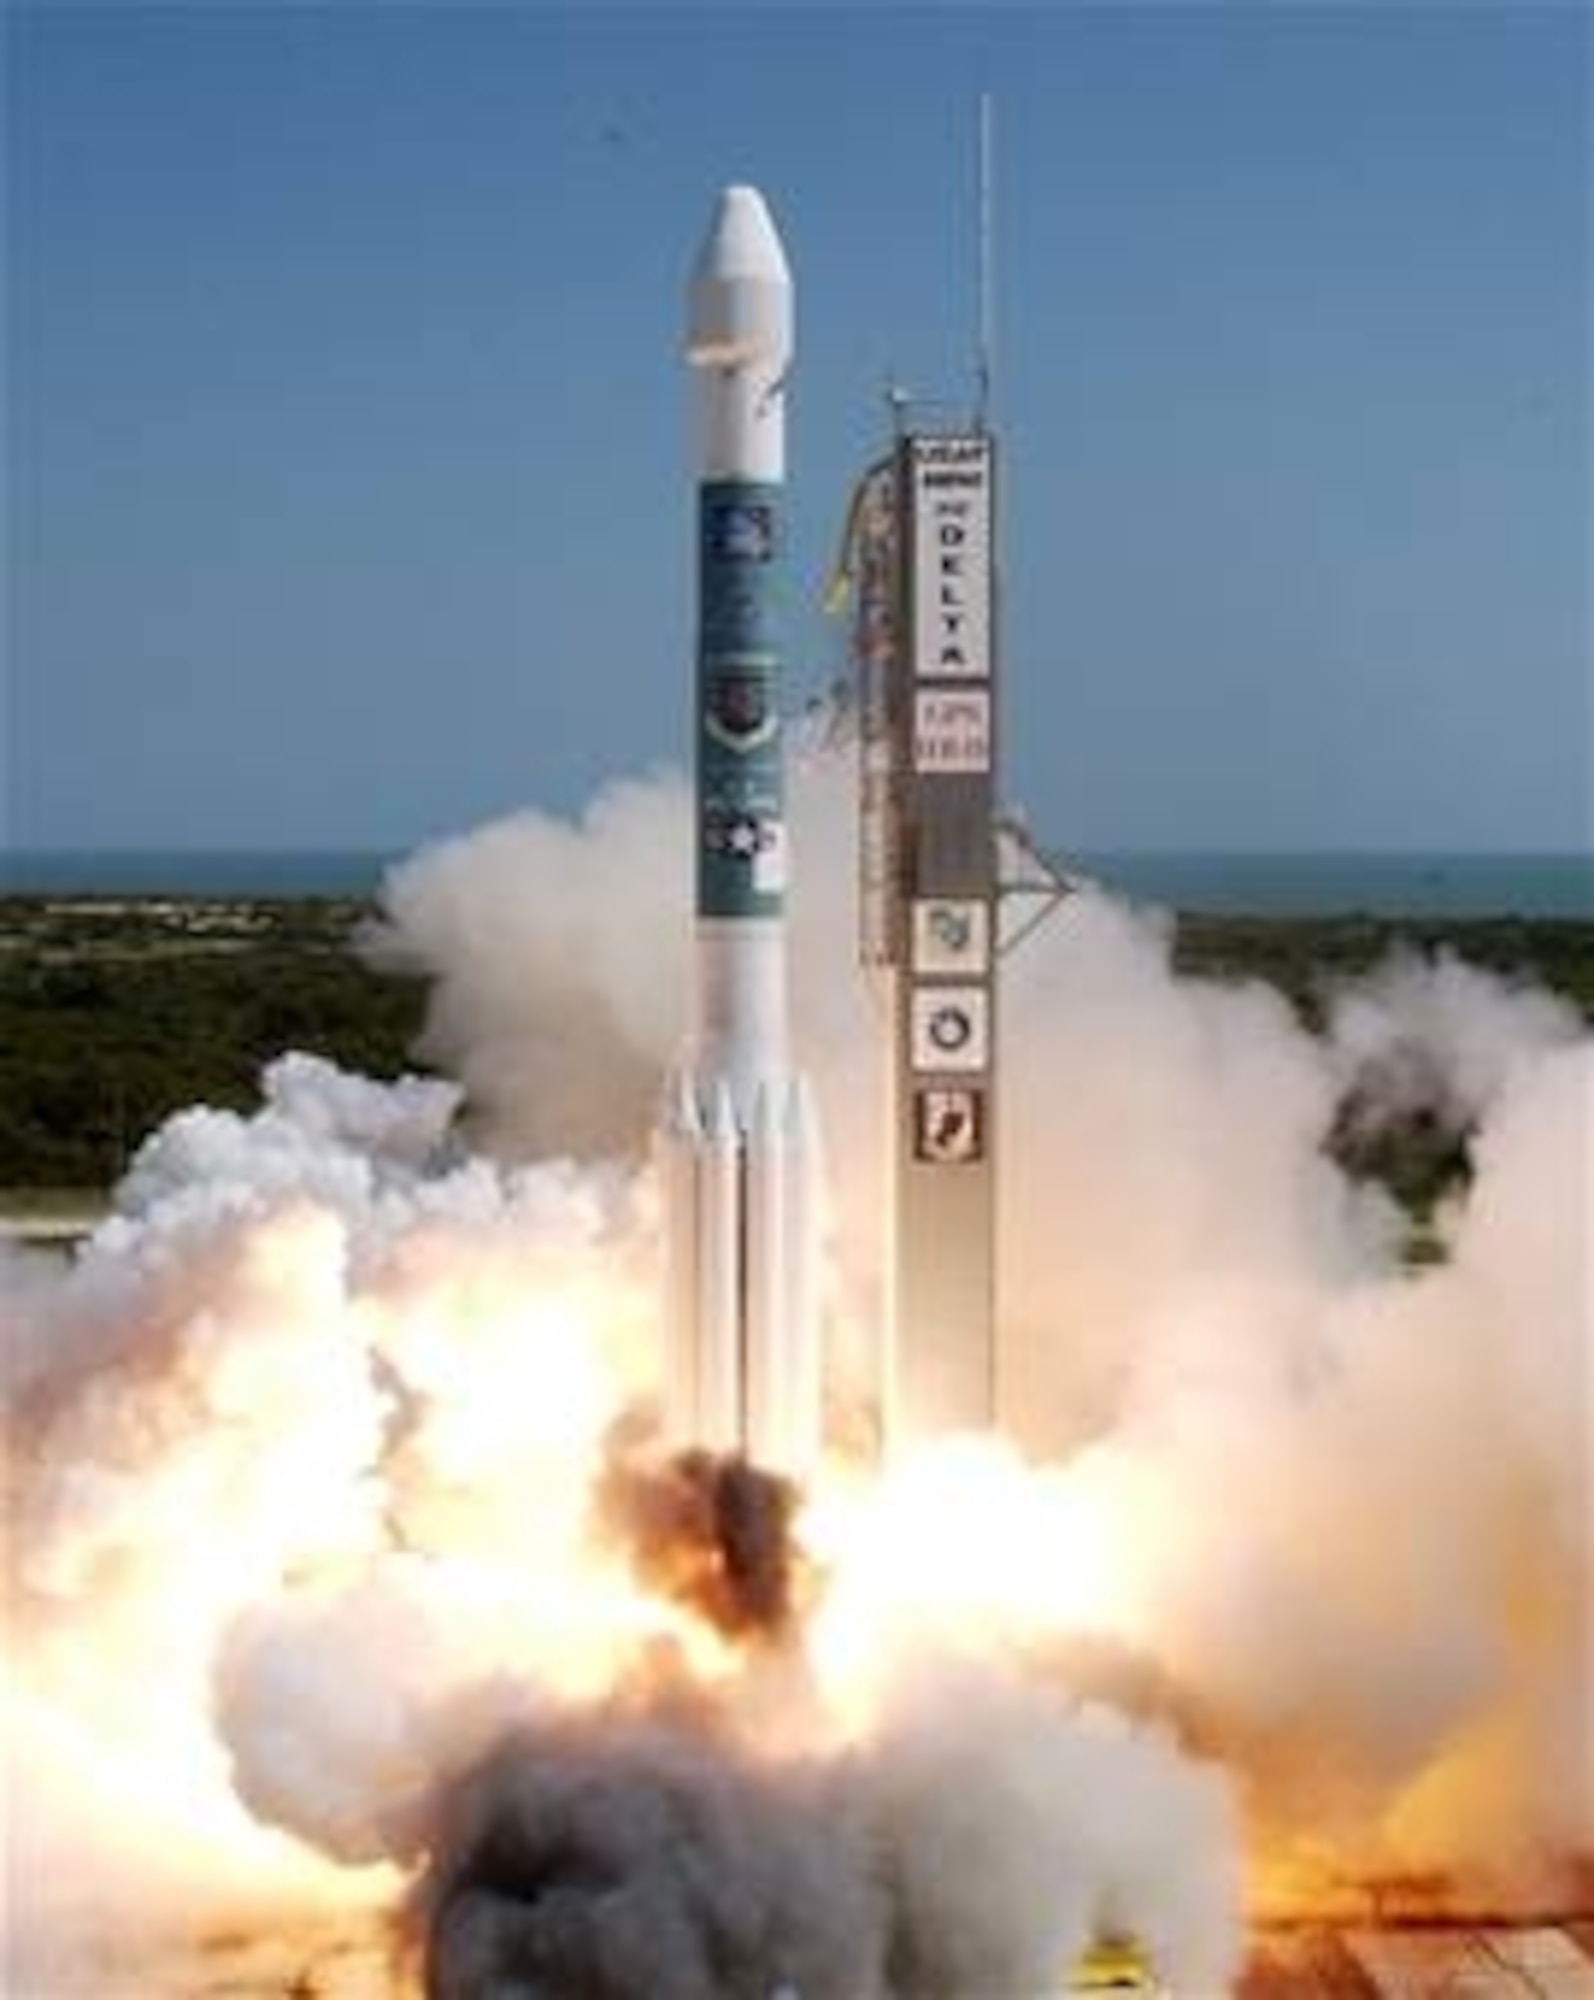 A Delta II space launch vehicle lifts off from Complex 17A at Cape Canaveral Air Force Station, Fla., Sept. 25. It carried a NAVSTAR Global Positioning System satellite into orbit. (U.S. Air Force photo)